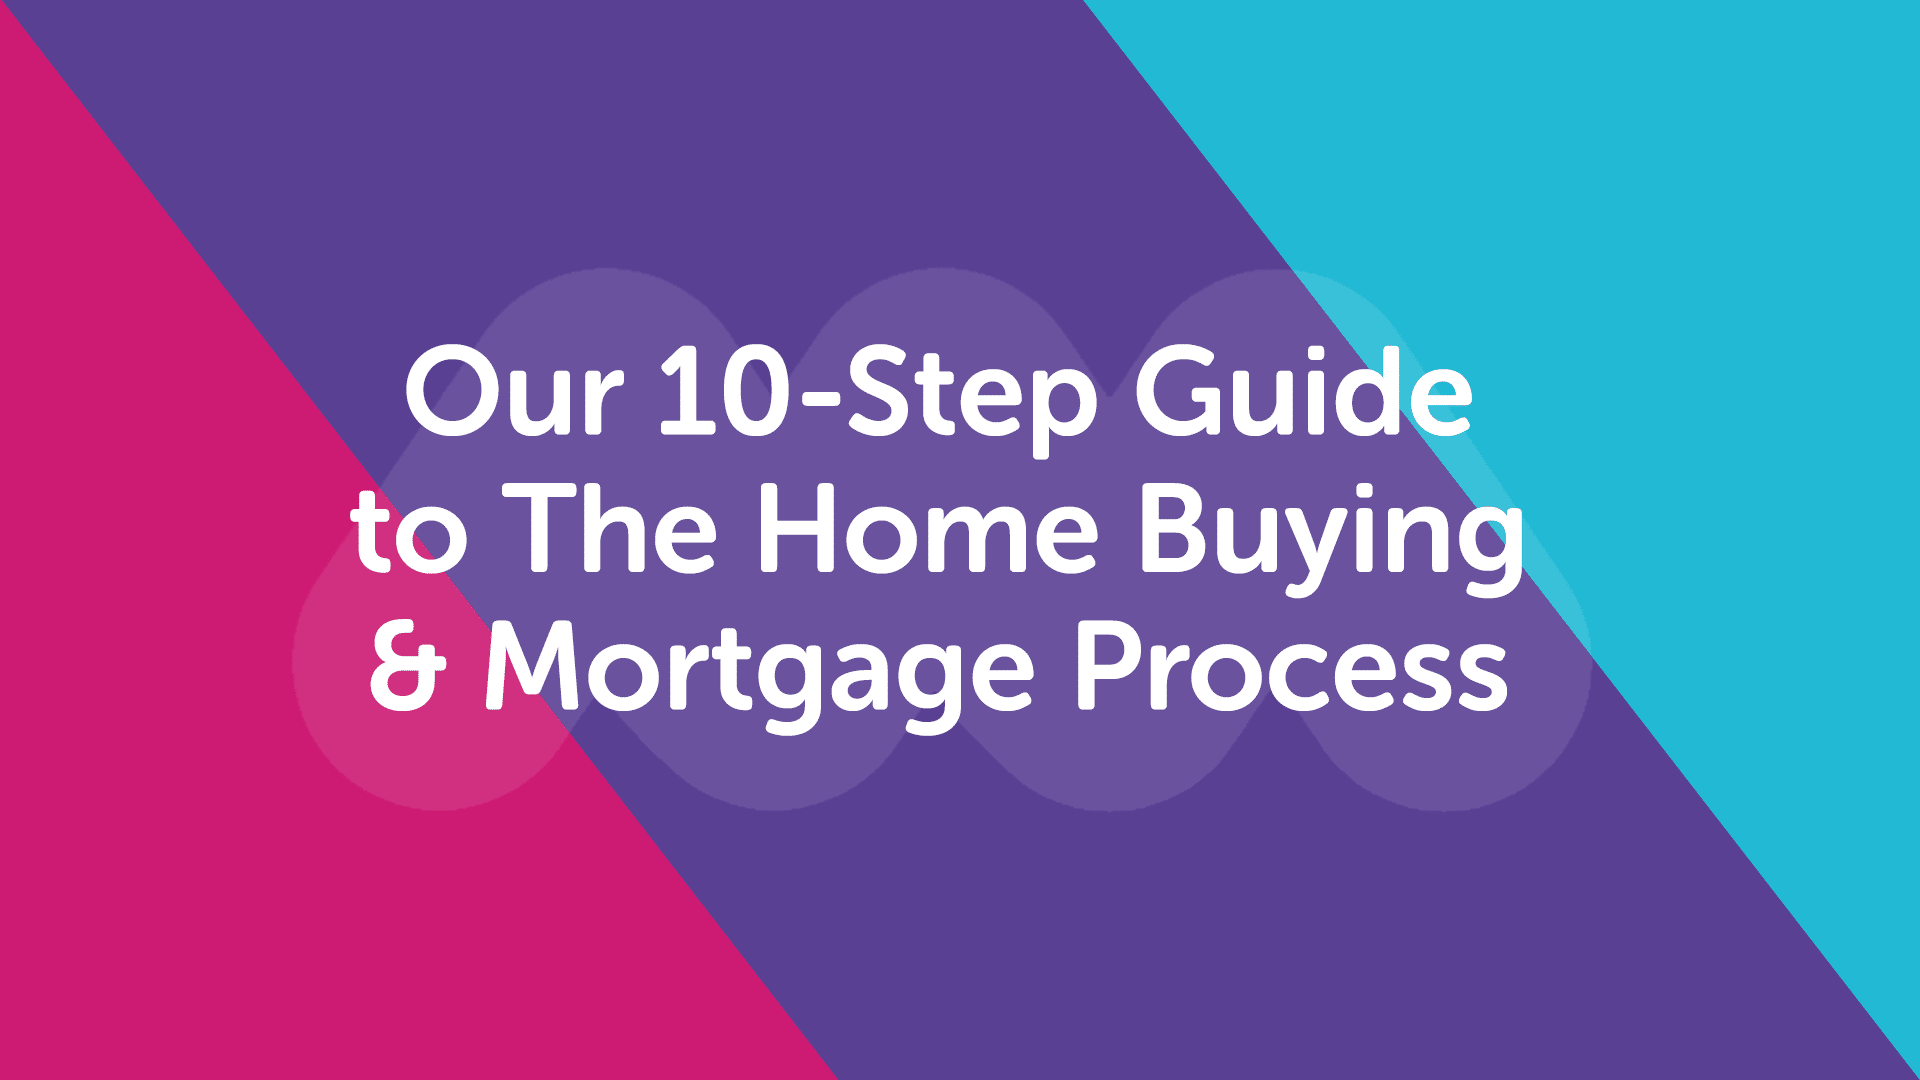 10 Step Home Buying Guide Manchester